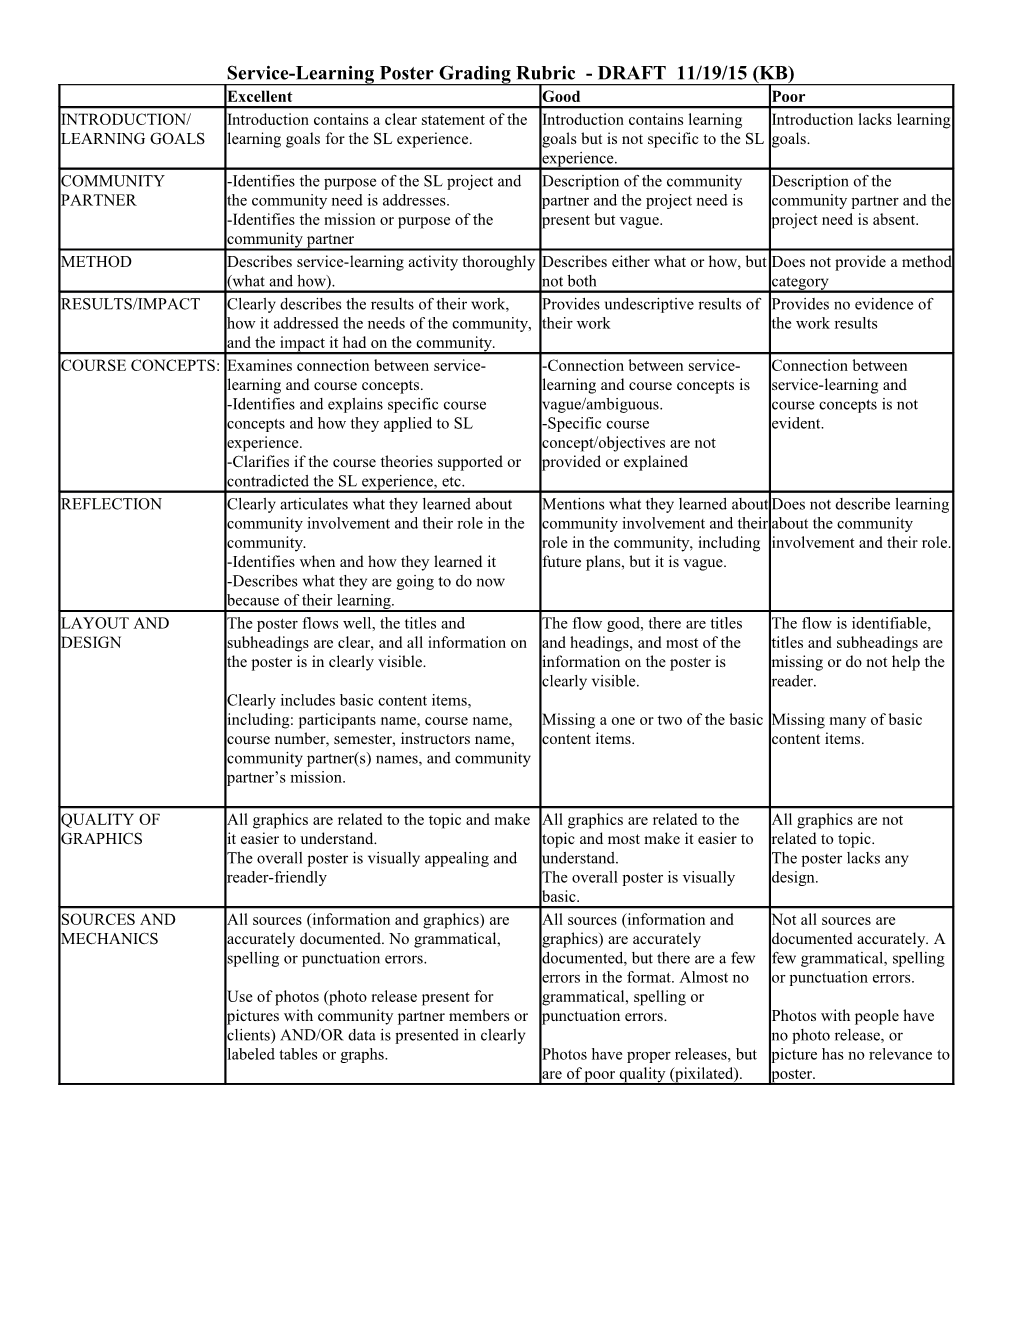 Service-Learning Poster Grading Rubric - DRAFT 11/19/15 (KB)